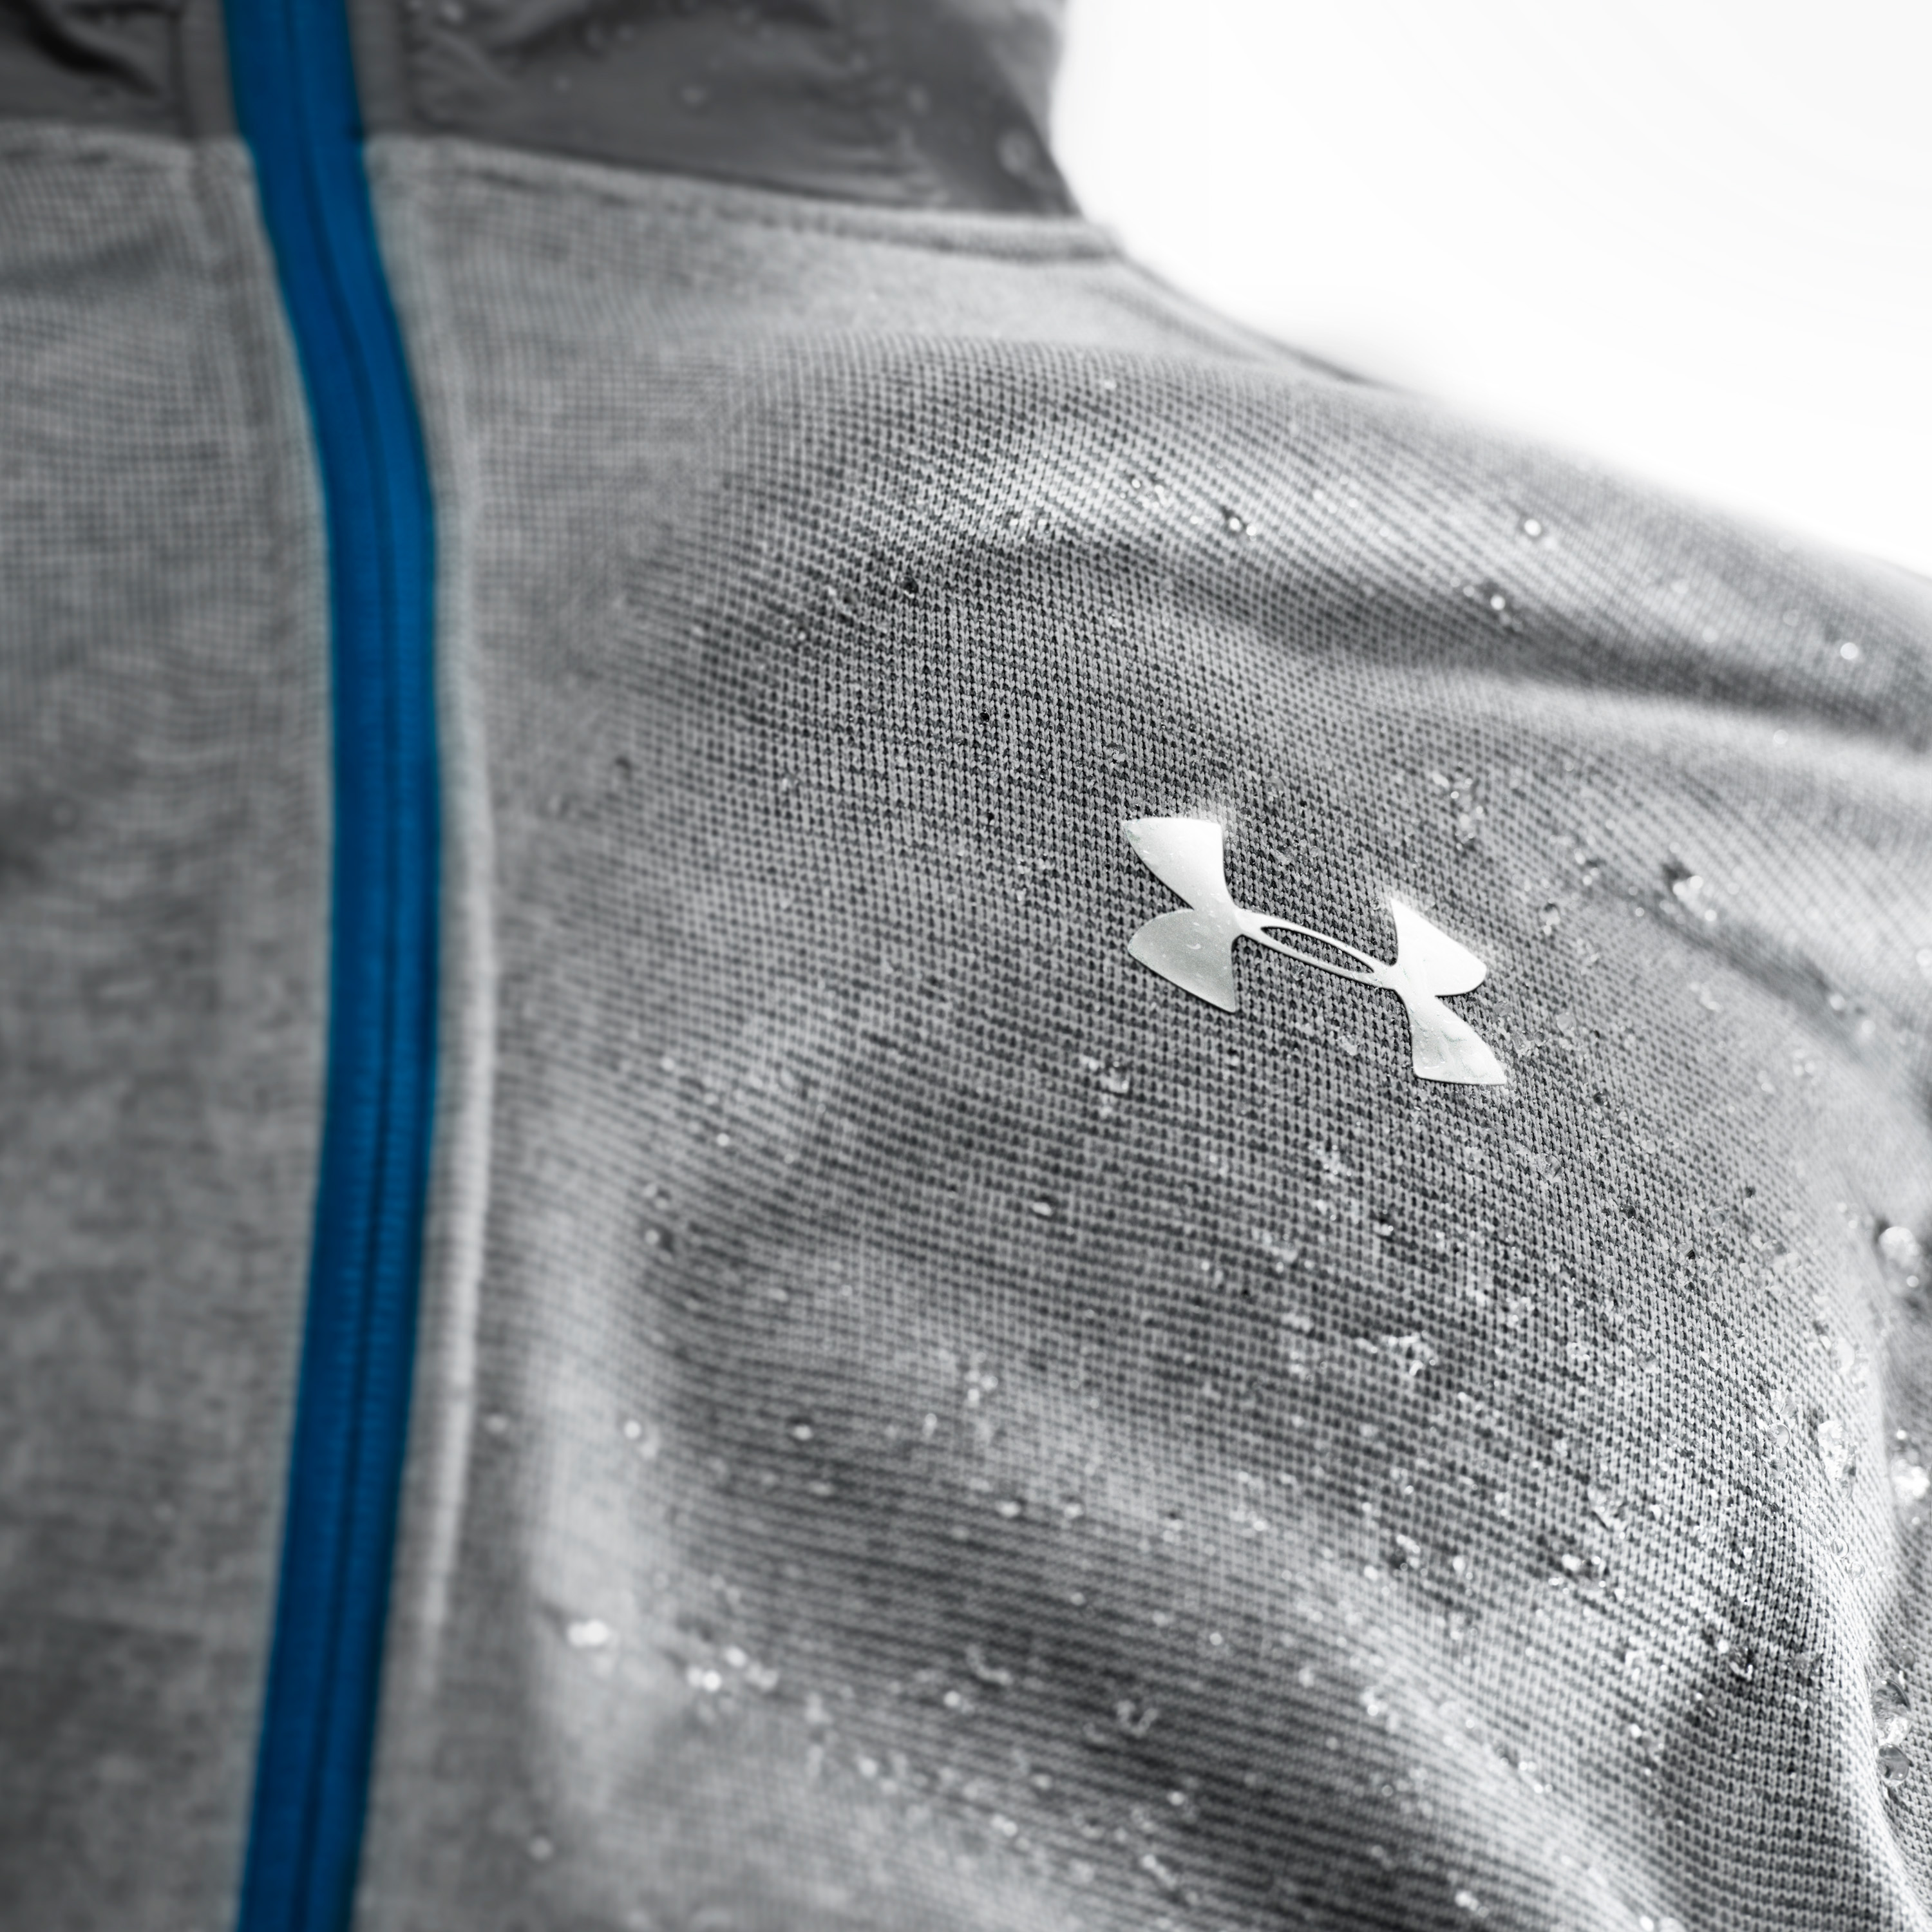 Under Armour: SWACKET - Product Design & Photography